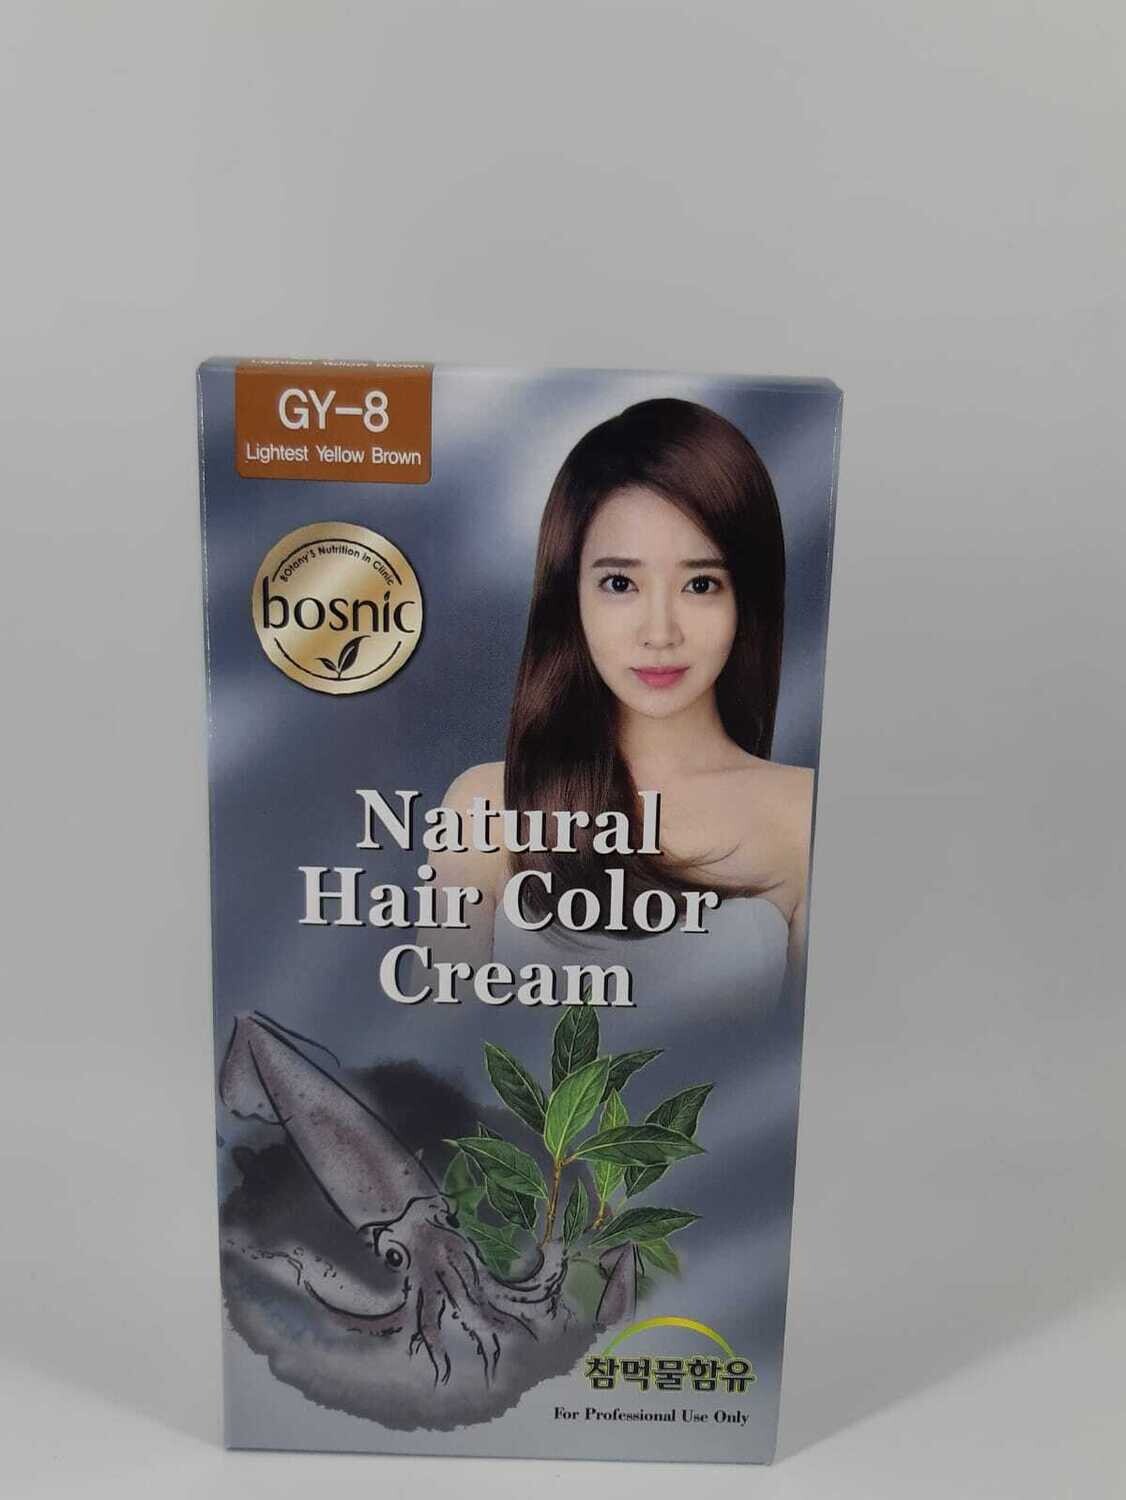 Bosnic GY-8 Lightest Yellow Brown Natural Hair Color Cream